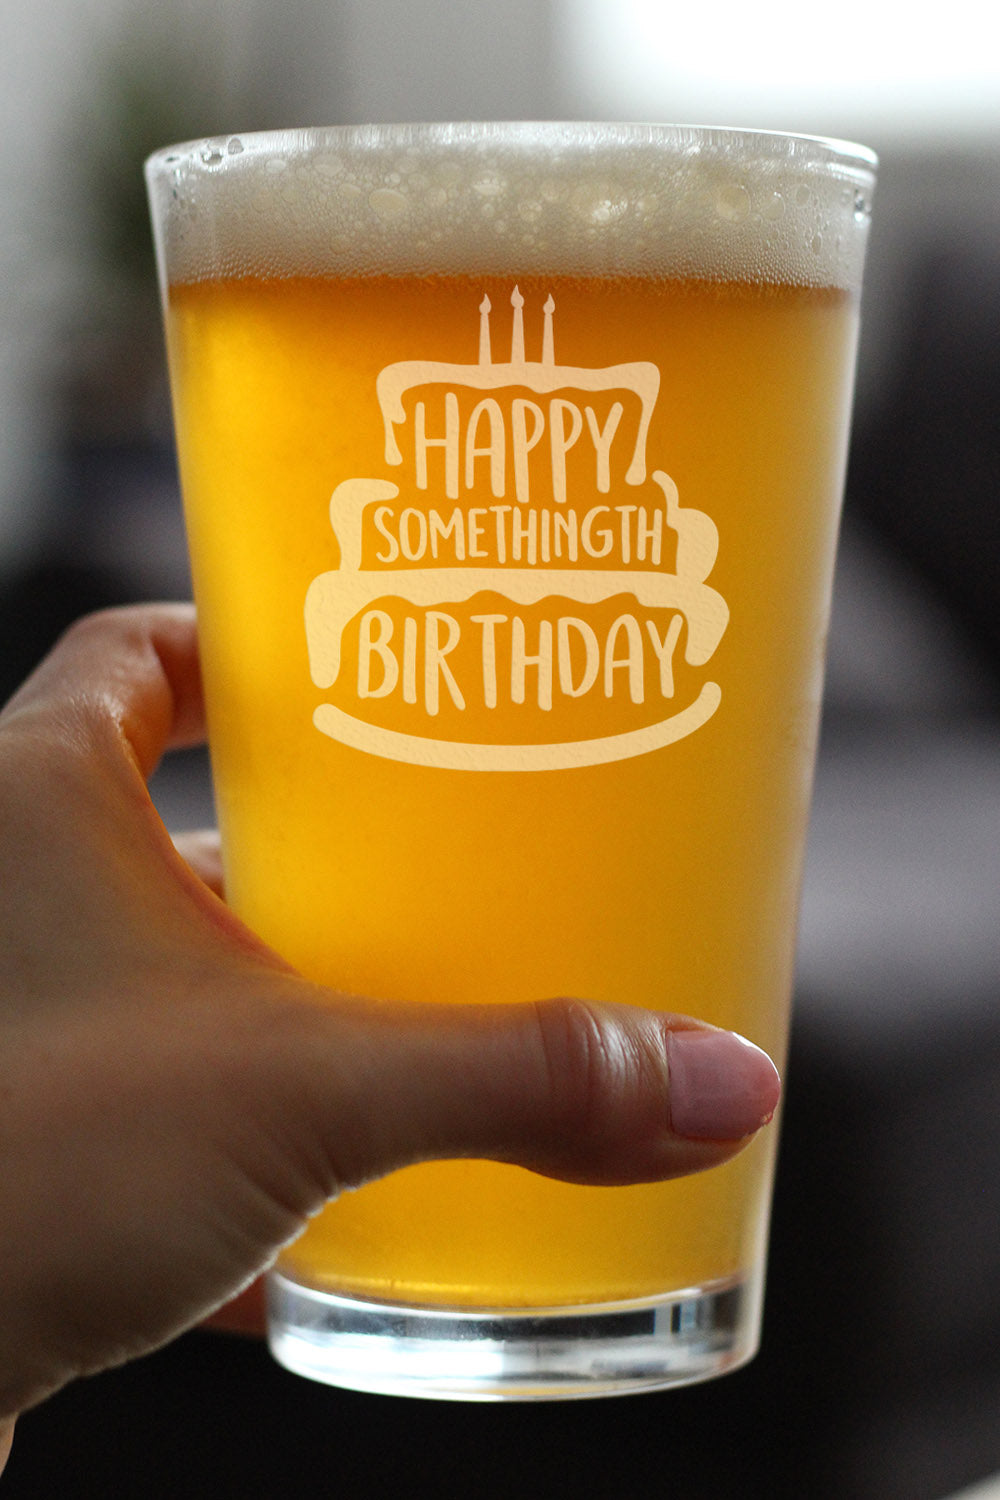 Somethingth Birthday - Funny 16 oz Pint Glass for Beer - Bday Gifts for Men or Women Getting Older - Fun Party Decor